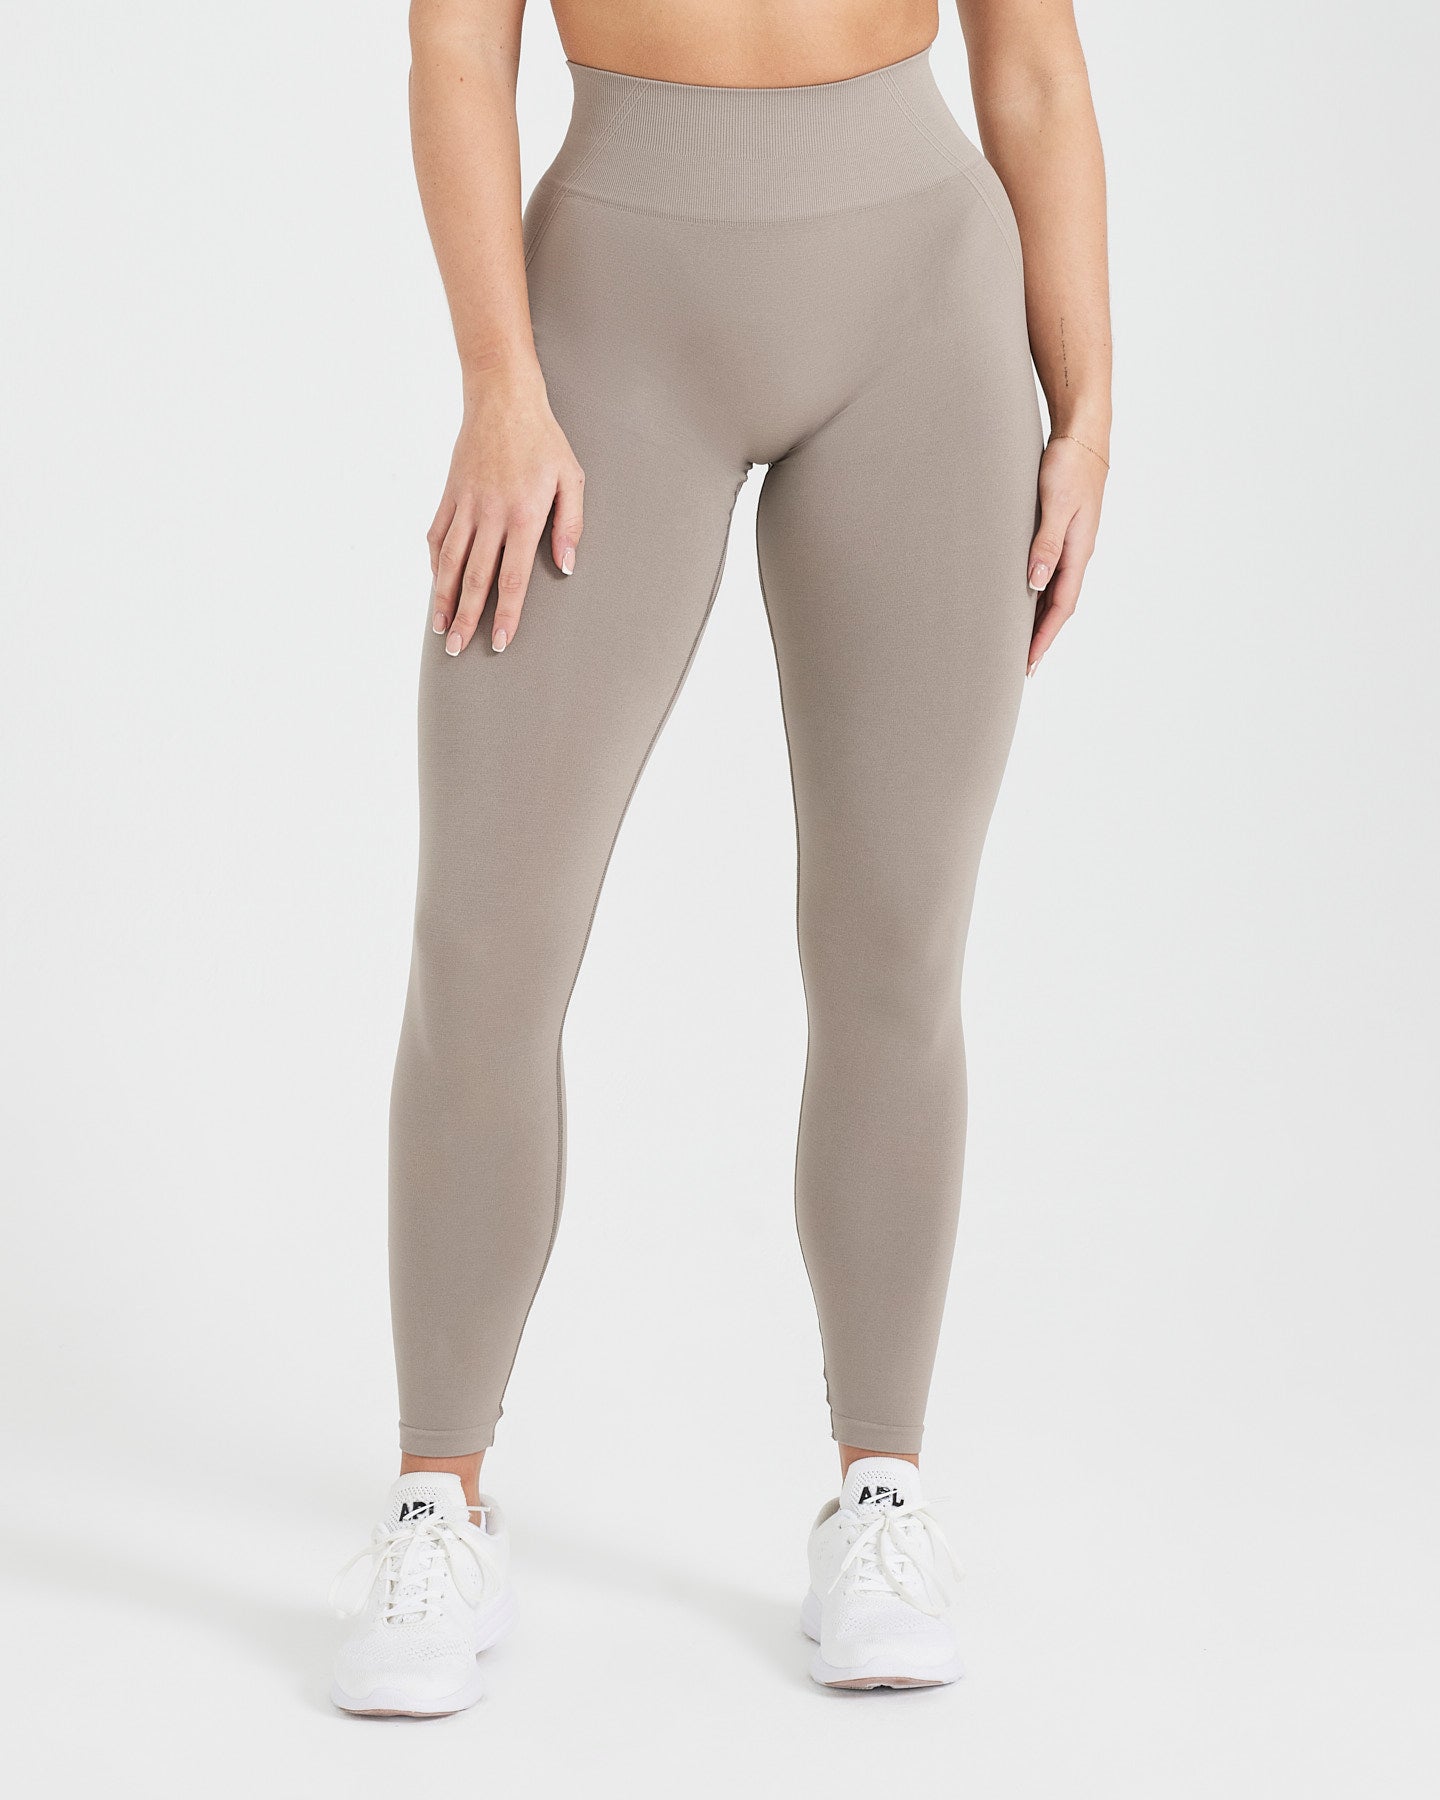 lululemon athletica Knit Athletic Tights for Women